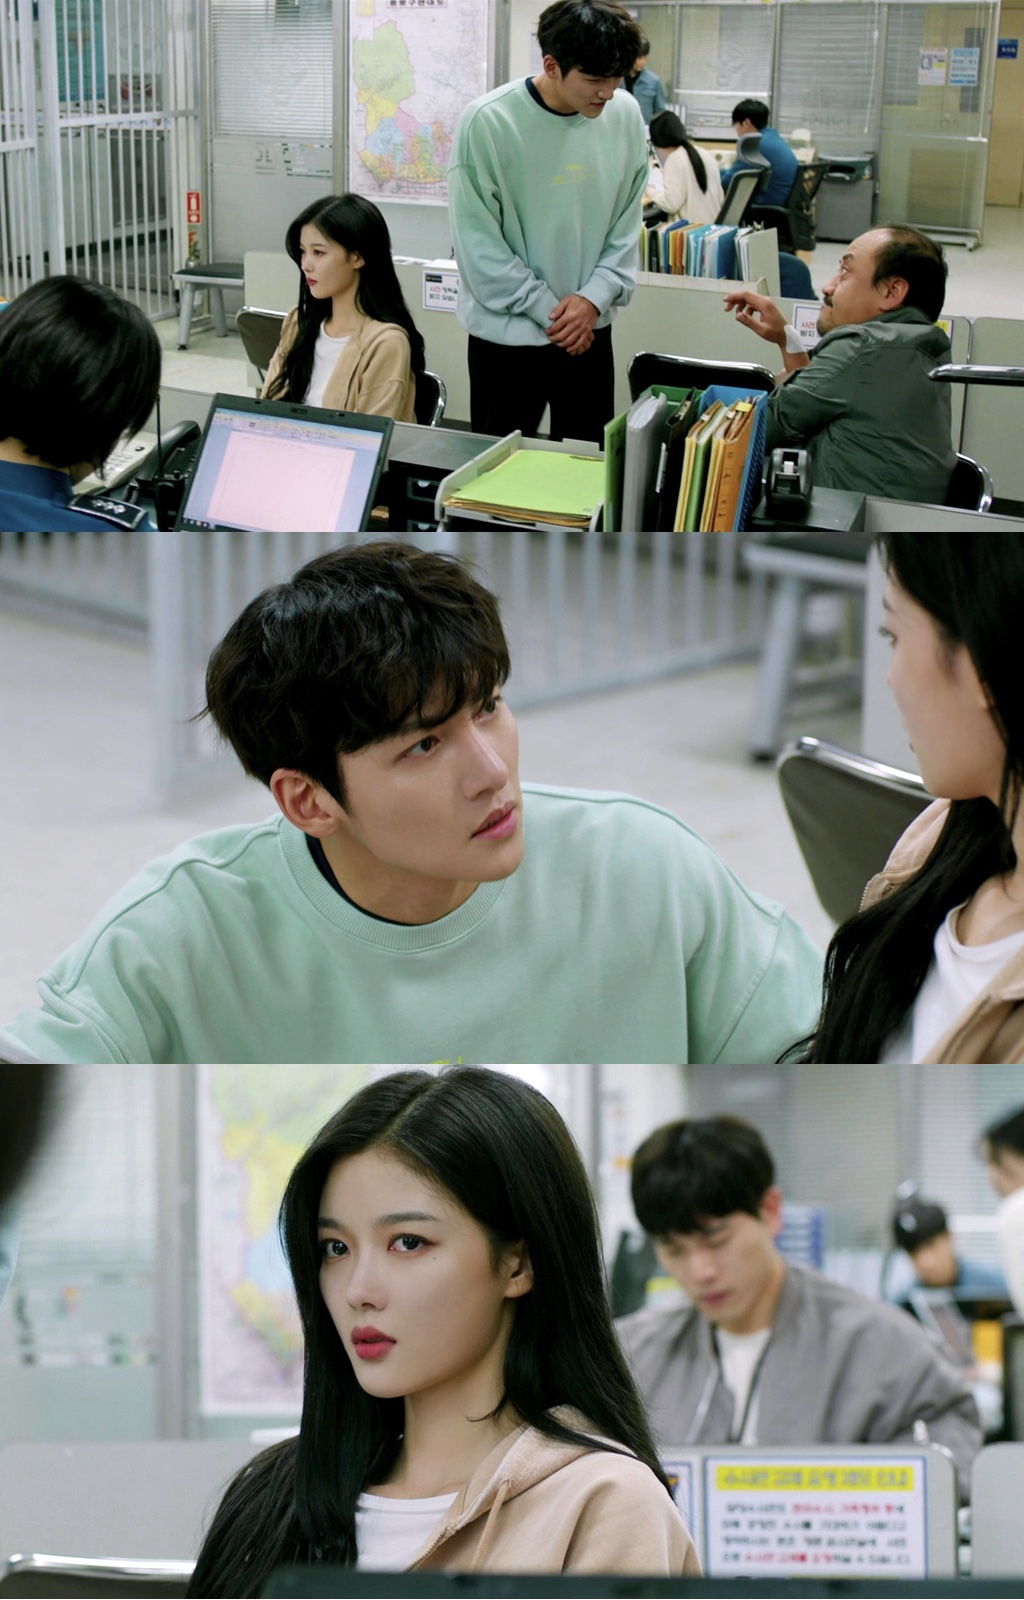 Why did Ji Chang-wook and Kim Yoo-jung come to Police?SBSs Lamar Jackson Convenience store morning star depicts Choi Dae-heon (Ji Chang-wook), a manager who is approaching through various incidents in the Convenience store, and Kim Yoo-jung.The star is struggling to become a formal alba even in the old days of Choi Dae-heon.However, in the last three episodes, Choi Dae-heon misunderstood the star.It was seen by Jeong Sae-Sun and GFriend Yoo Yeon-ju (Han Seon-hwa) having a scuffle.The star was the one who saved the flexible liquor that was being suffered by the Yangchi, but Choi Dae-heon, who did not know it, Misunderstood the star, and the scene where the three people face each other, amplified the curiosity for future development.Meanwhile, the production team of Convenience store Morning Star released a serious atmosphere that Choi Dae-heon and Jung Sae-sung have never seen before, ahead of the four-time broadcast on the 27th.It was the two people who were together in Police.The star in the photo is being investigated in Police, and the image of the star with red eyes as if it were unfair causes the sadness.Next to him, Choi Dae-heon is figuring out what happened.Choi Dae-heon, who has always been like a bullshit, bursts into anger that he can hardly see in Police on this day.The star makes me wonder why I was under police investigation, what Choi Dae-heon would have been angry about.Choi Dae-heon had previously suspected the past of the star, and tried to cut it off as a temporary alba.The case with GFriend Yoo Yeon-ju was added to this, and eventually he decided to cut the star. Then he heard that the star was being investigated at Police.Choi Dae-heon is really paying attention to whether it will be a dismissal of the star, how the meeting in Police will affect these relationships, and the attention of enthusiastic viewers is focused.Meanwhile, the fourth episode of SBSs Lamar Jacksons Convenience Store Morning Star will air at 10 p.m. on the 27th.Photo = SBS Convenience store morning star